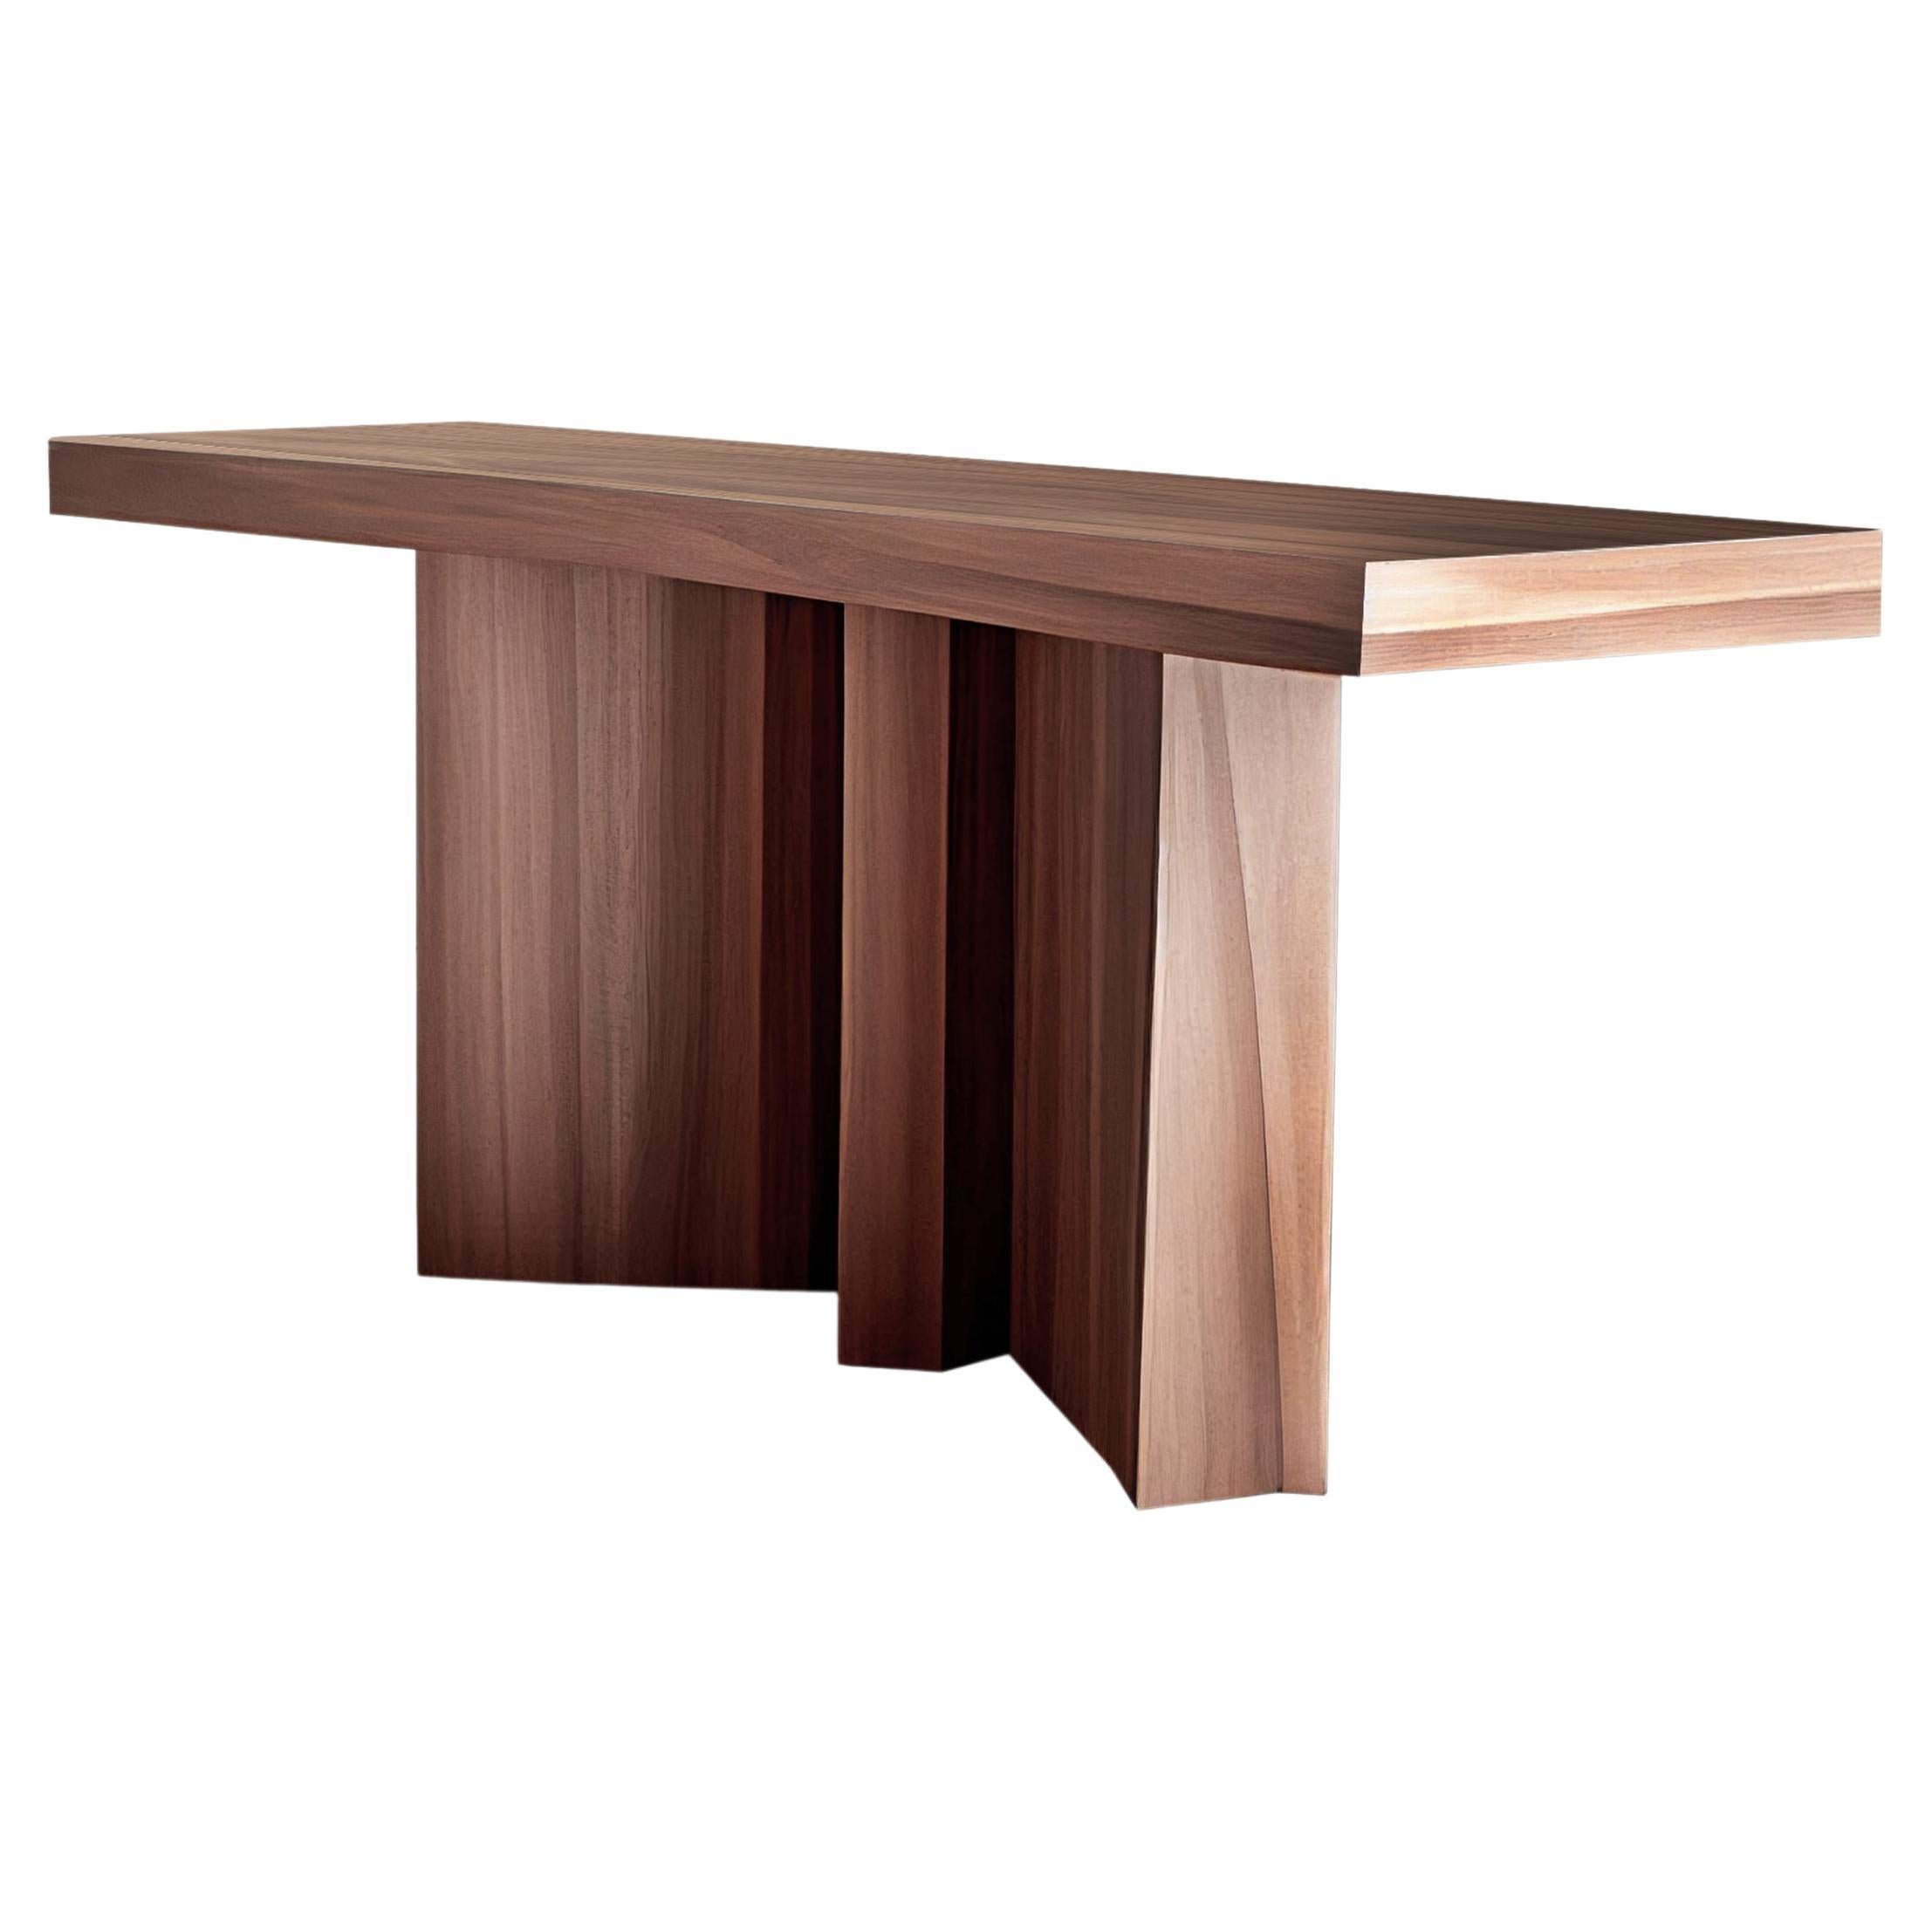 Sculptural Console Table, Sideboard Made of Solid Walnut Wood, Narrow Console For Sale